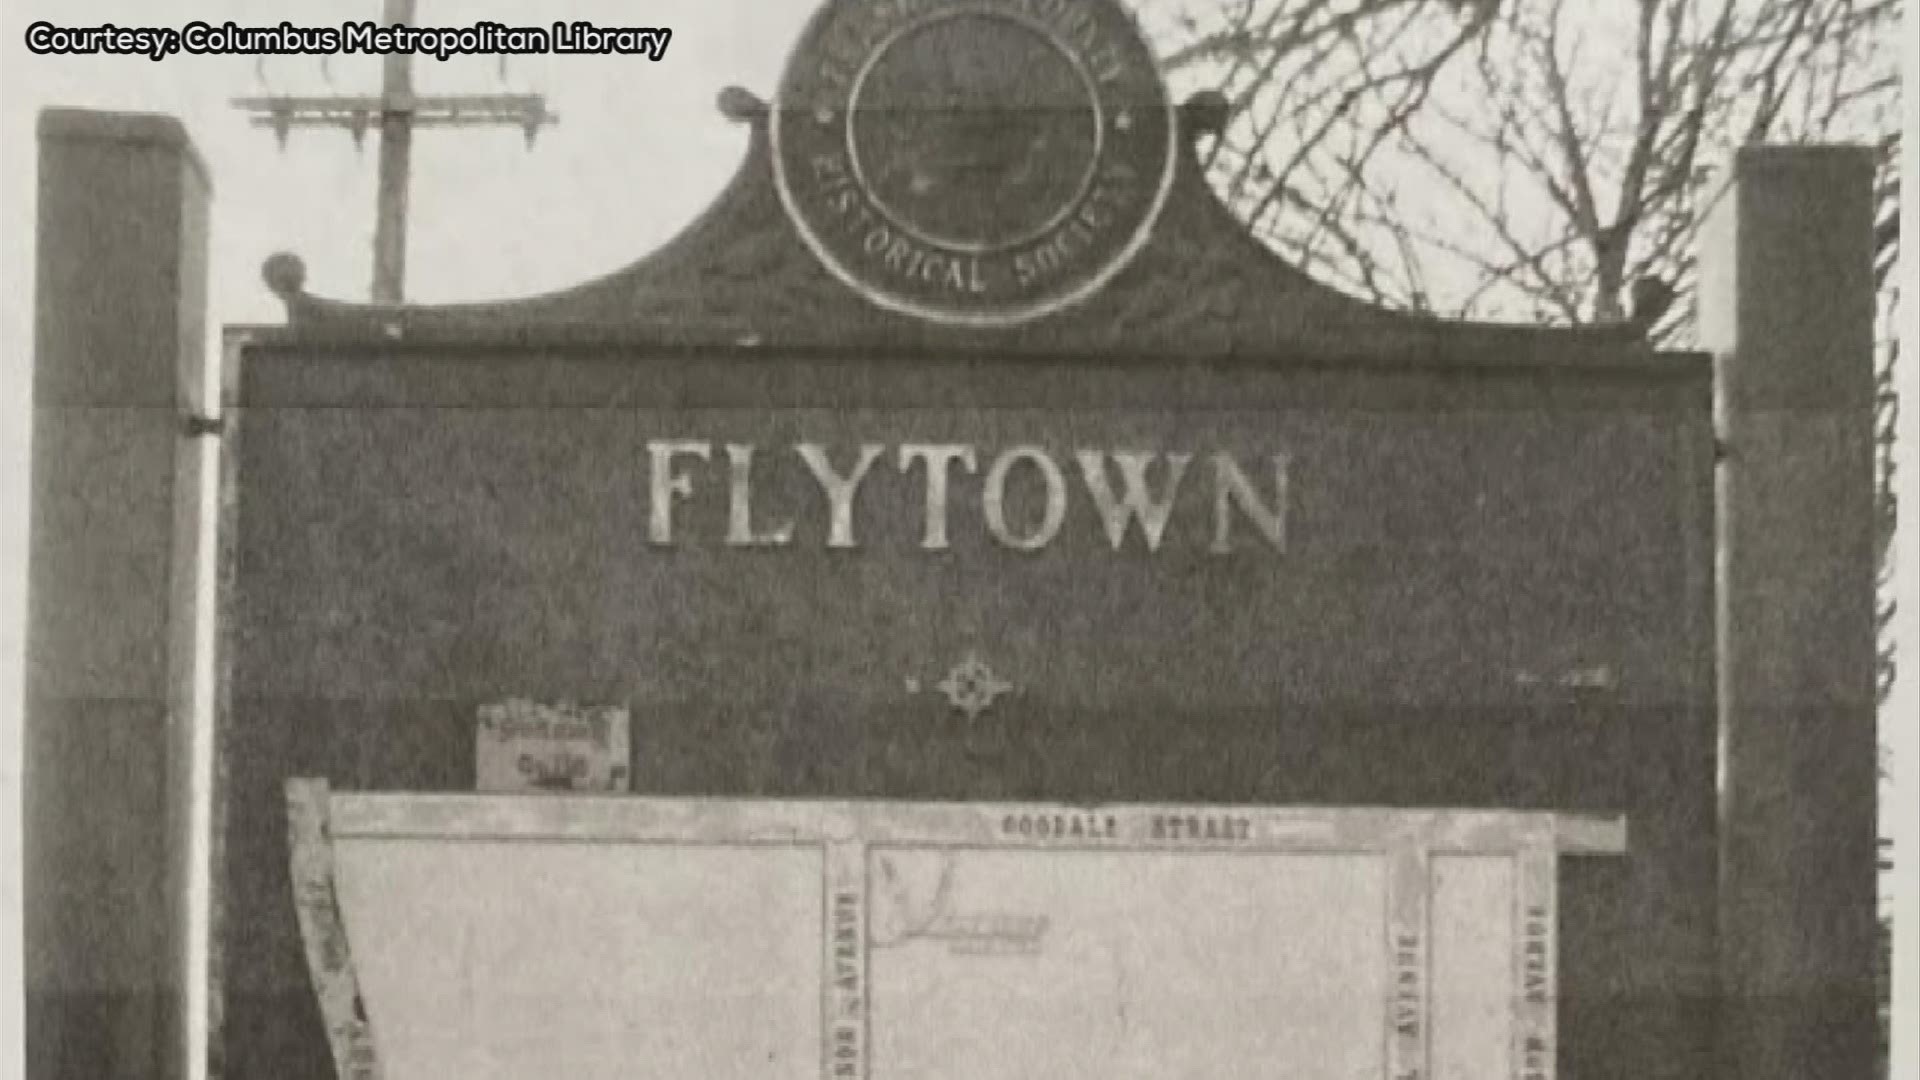 Flytown was an industrial community located near what is known now as the Short North.